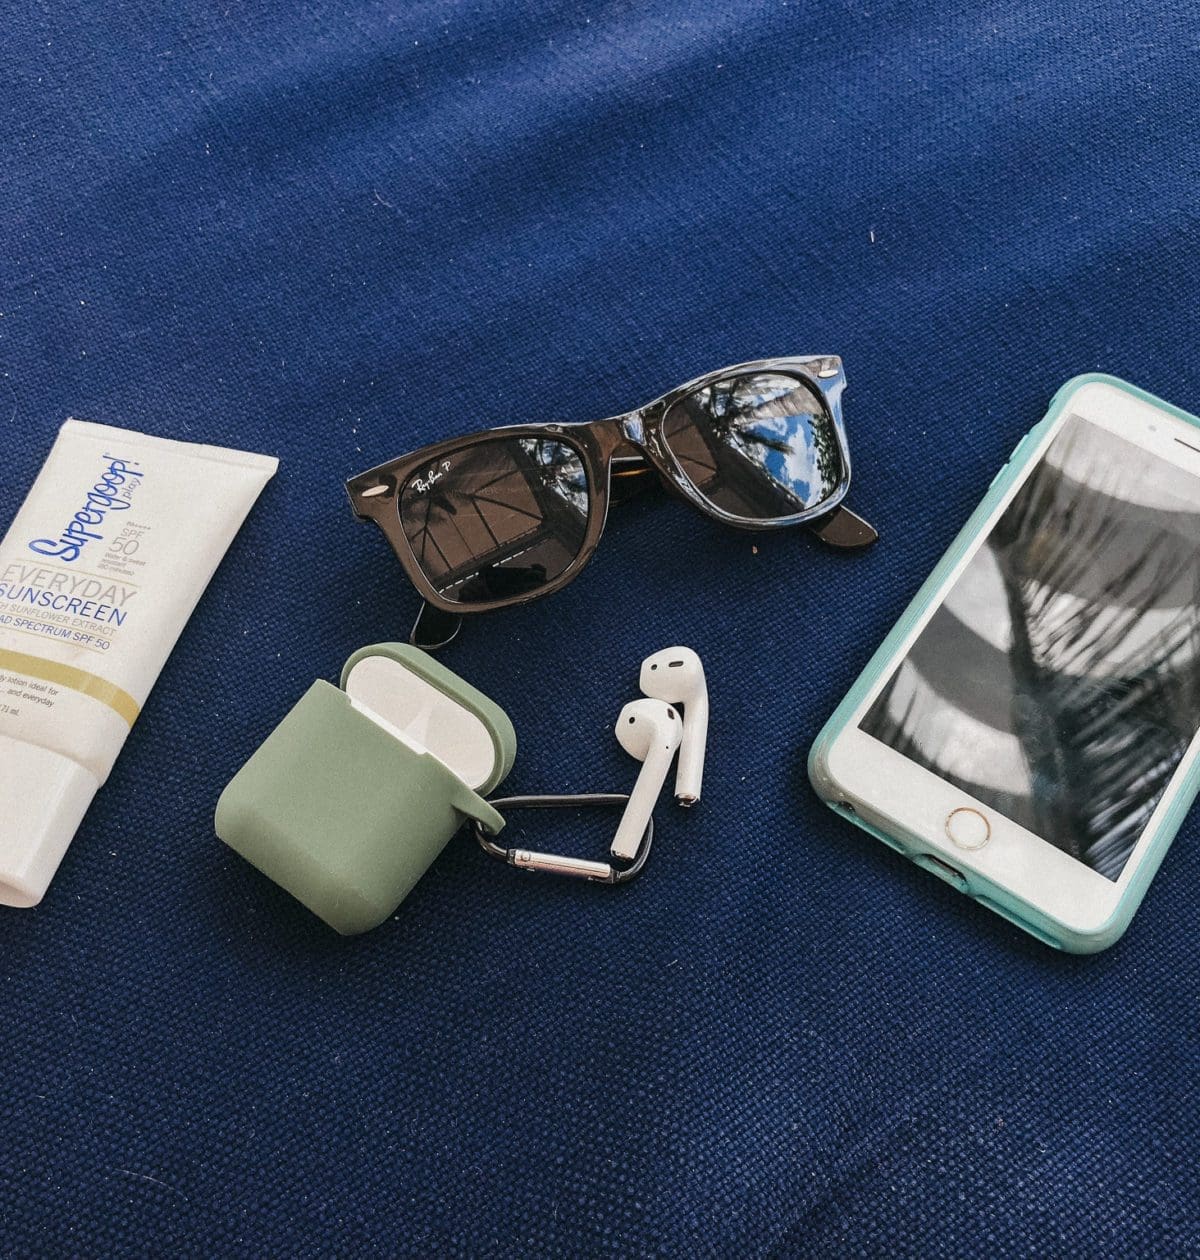 Air pods, sunglasses, cell phone, and sunscreen.